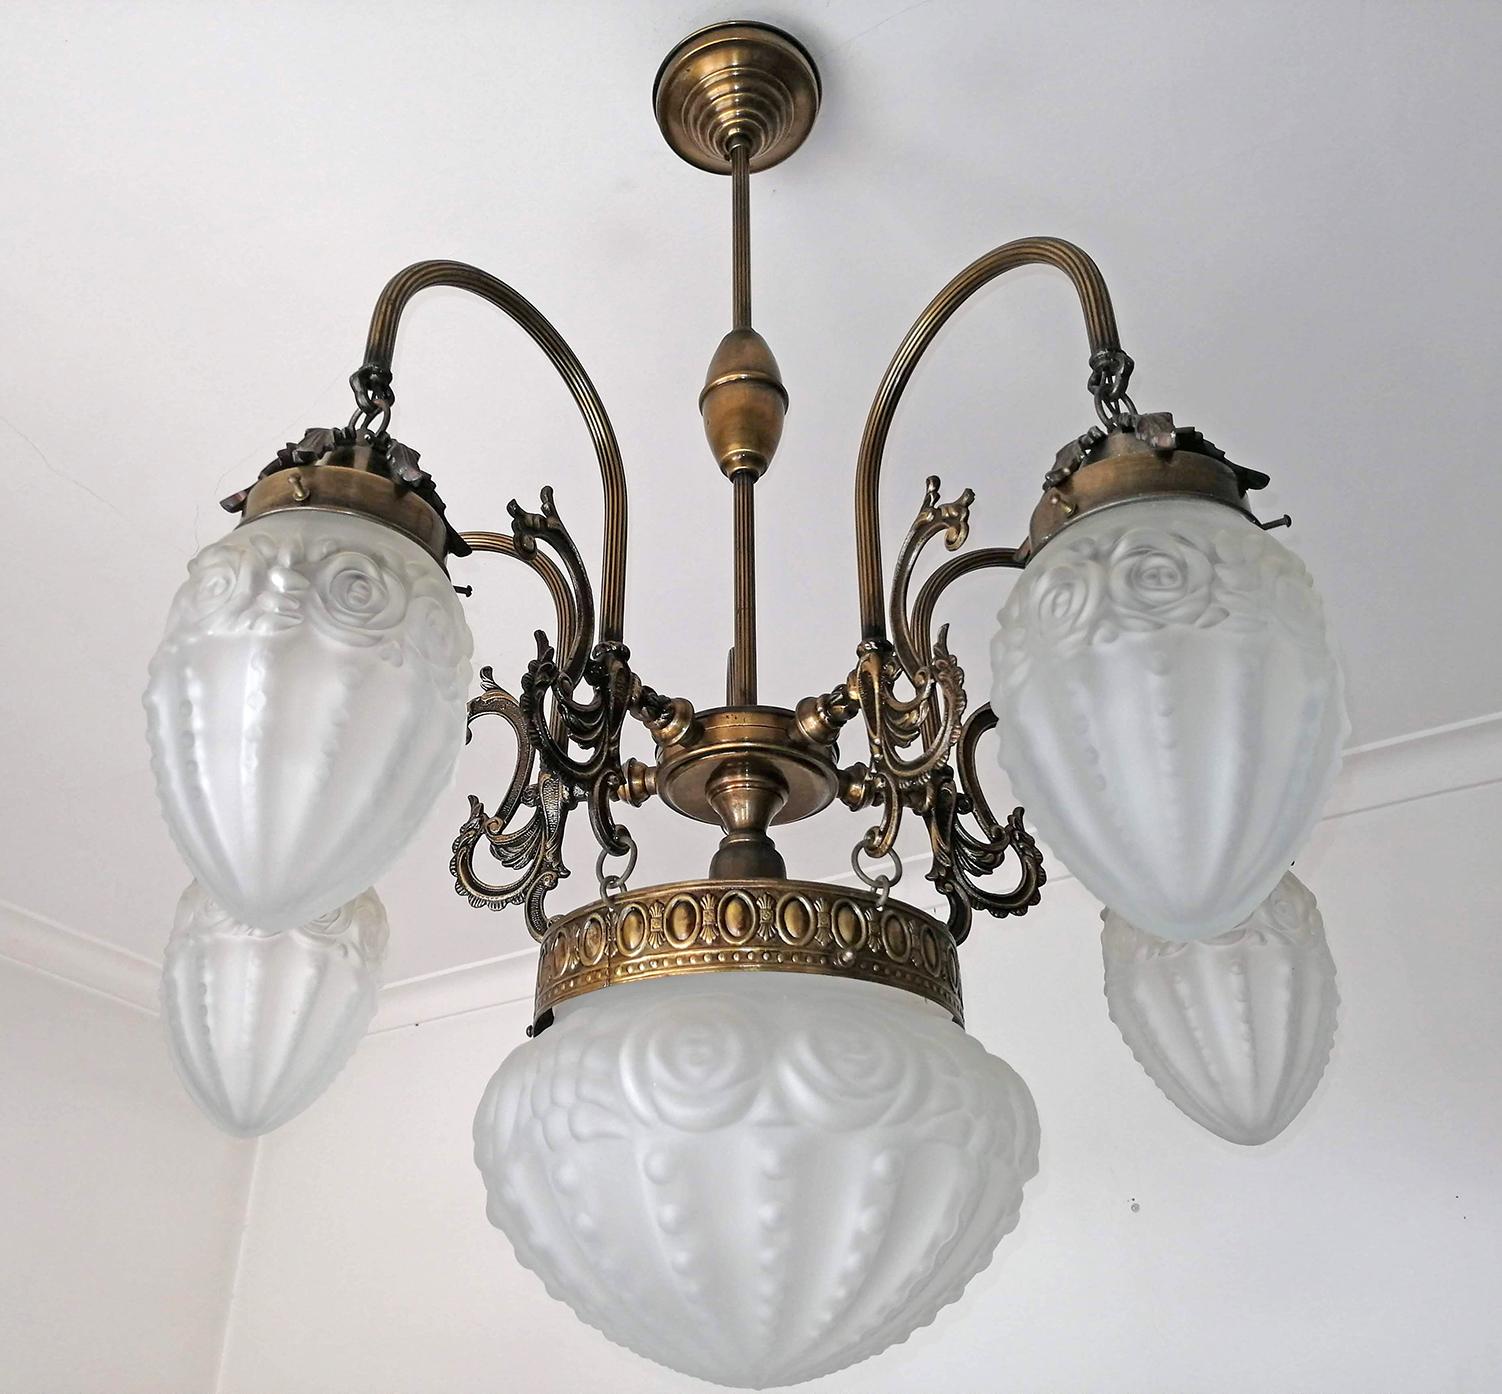 French Degué style Art Deco white frosted glass, 6-light chandelier/ brass bronze color with age patina
6-light bulbs (5 bulbs E14 40W and one bulb E27 60W)
Good working condition
Measures:
Diameter 27 in / 68 cm
Height 35 in / 88 cm
Glass shades 5